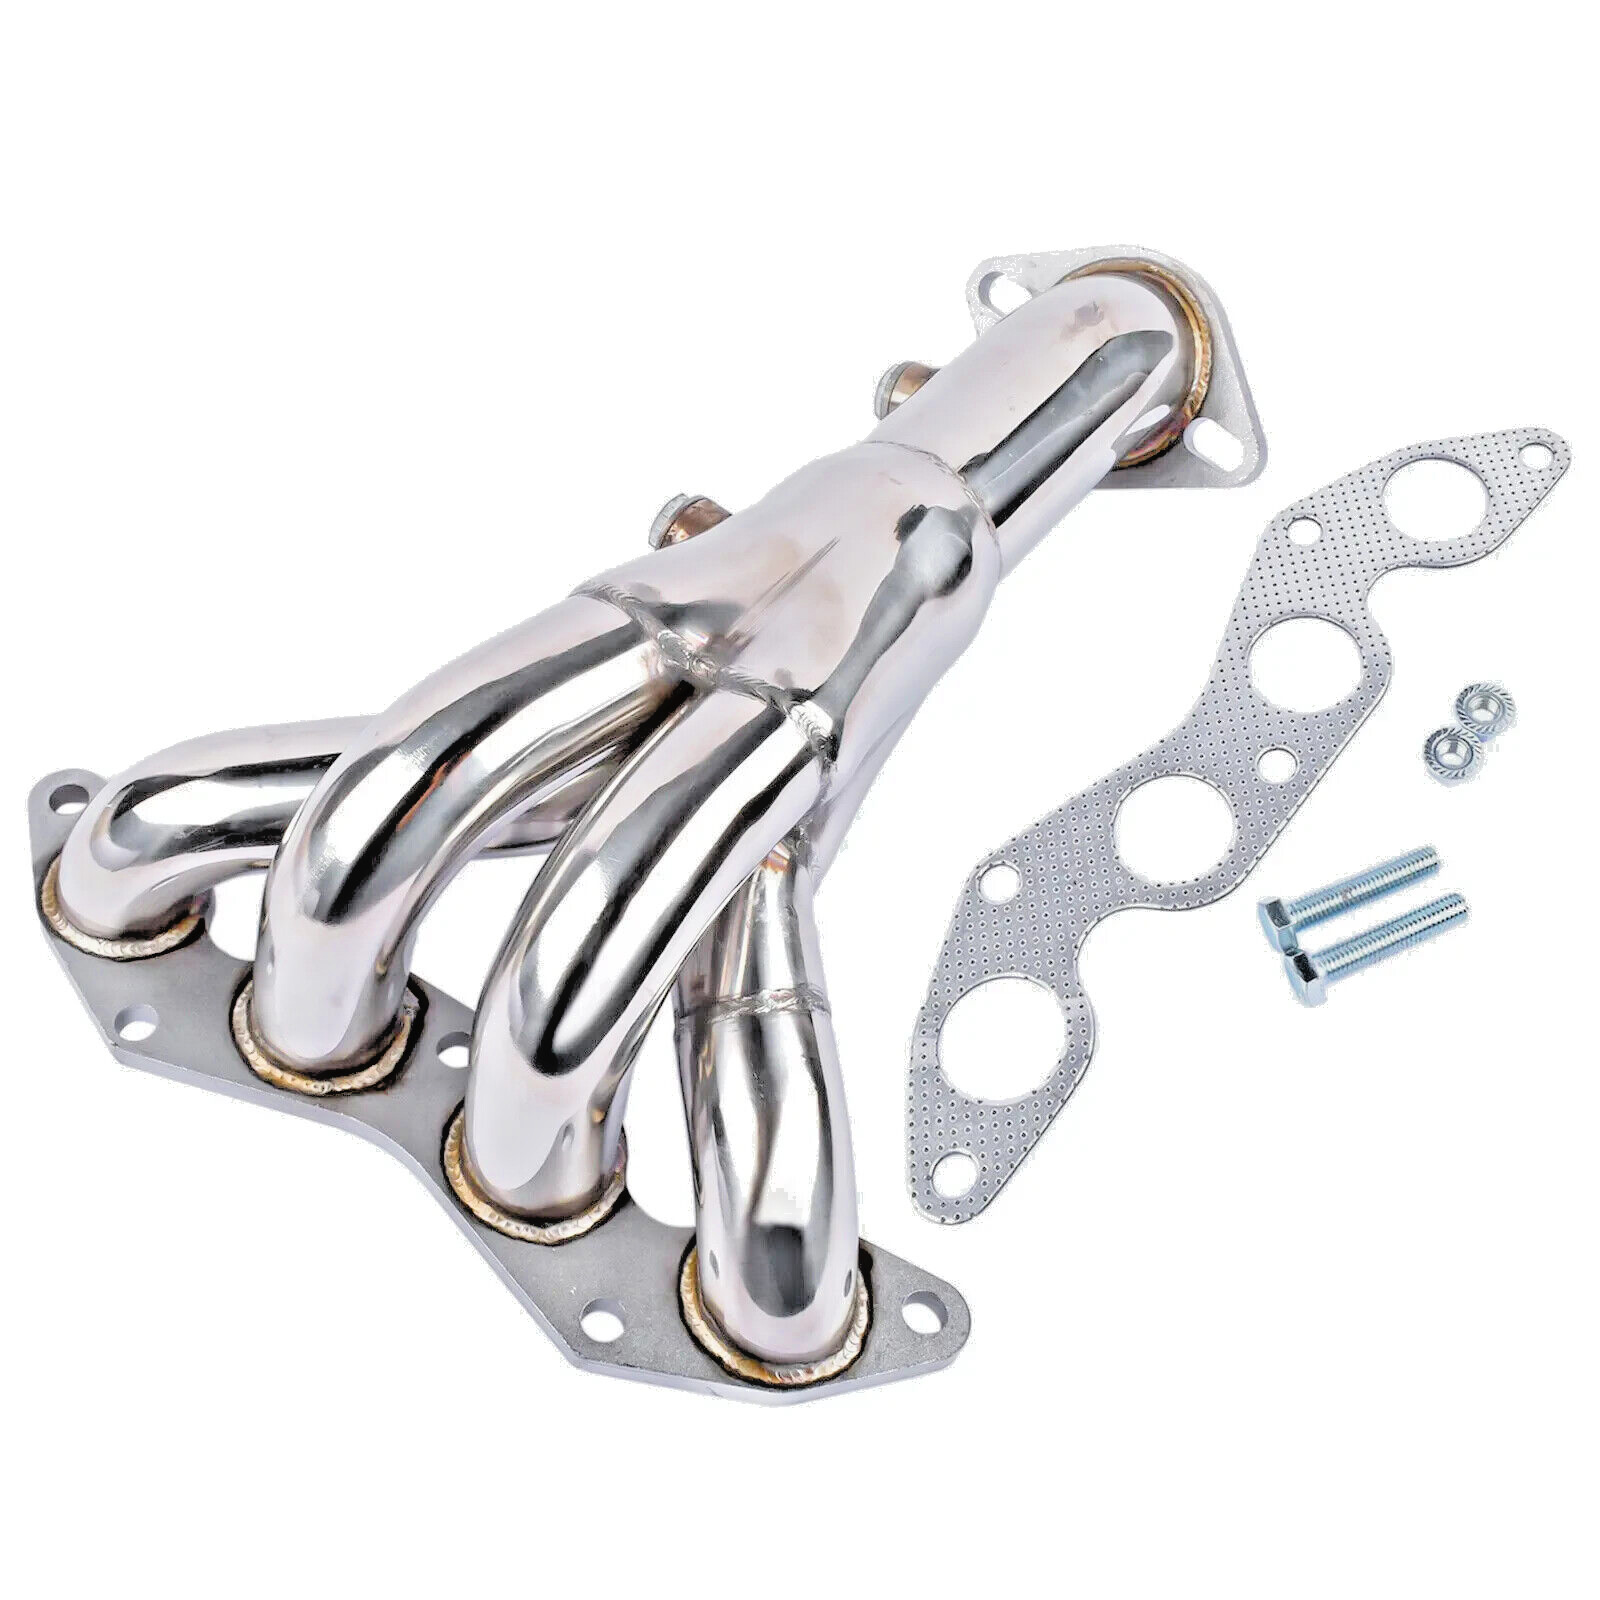 NEW Exhaust Manifold Header Stainless for Honda Civic Dx/Lx 2001-2005